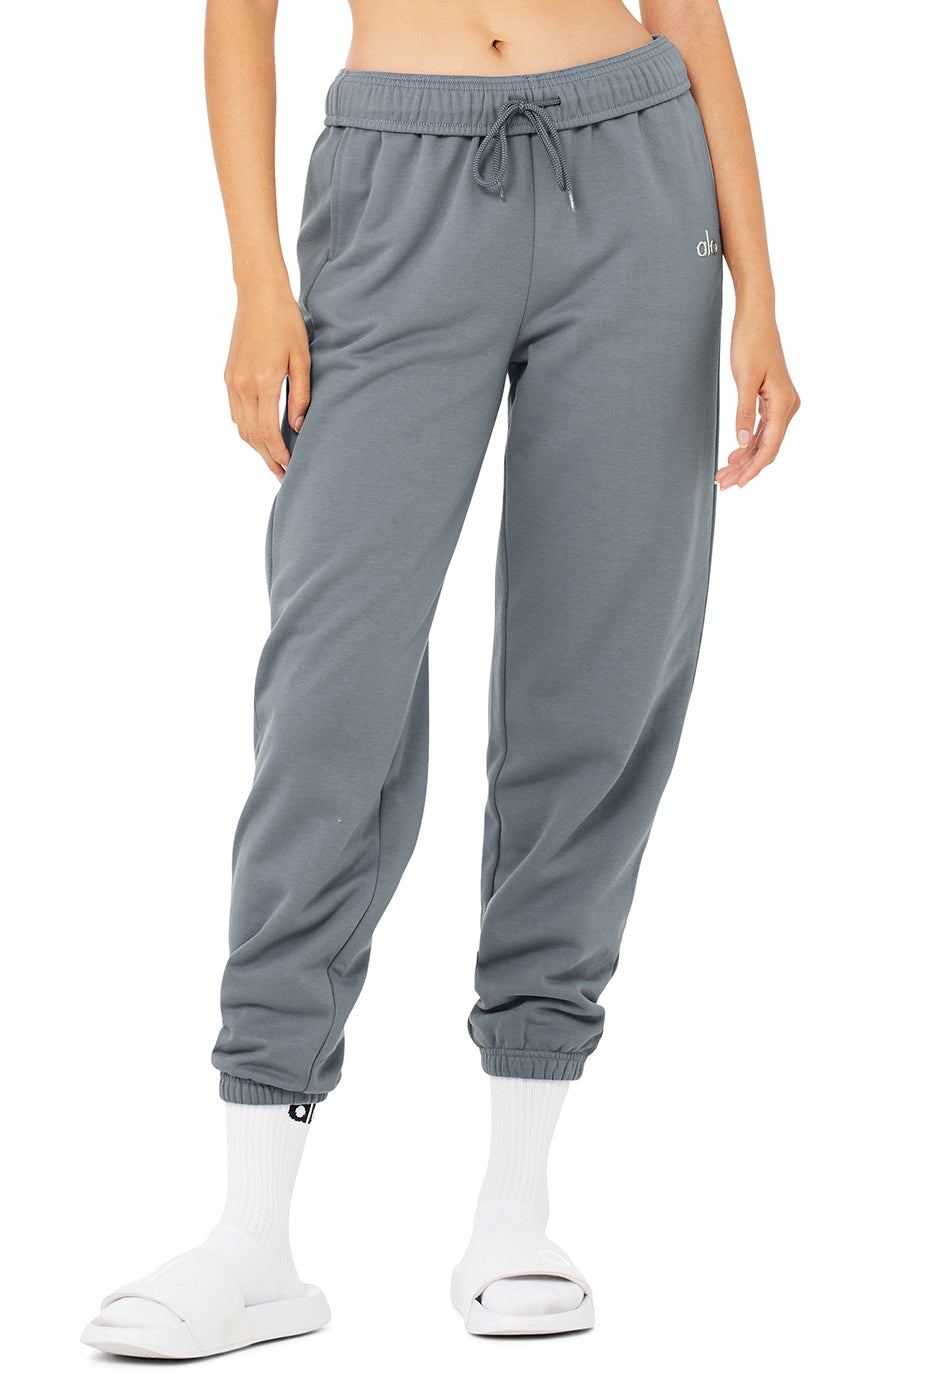 Accolade Sweatpant in Steel Blue by Alo Yoga - International